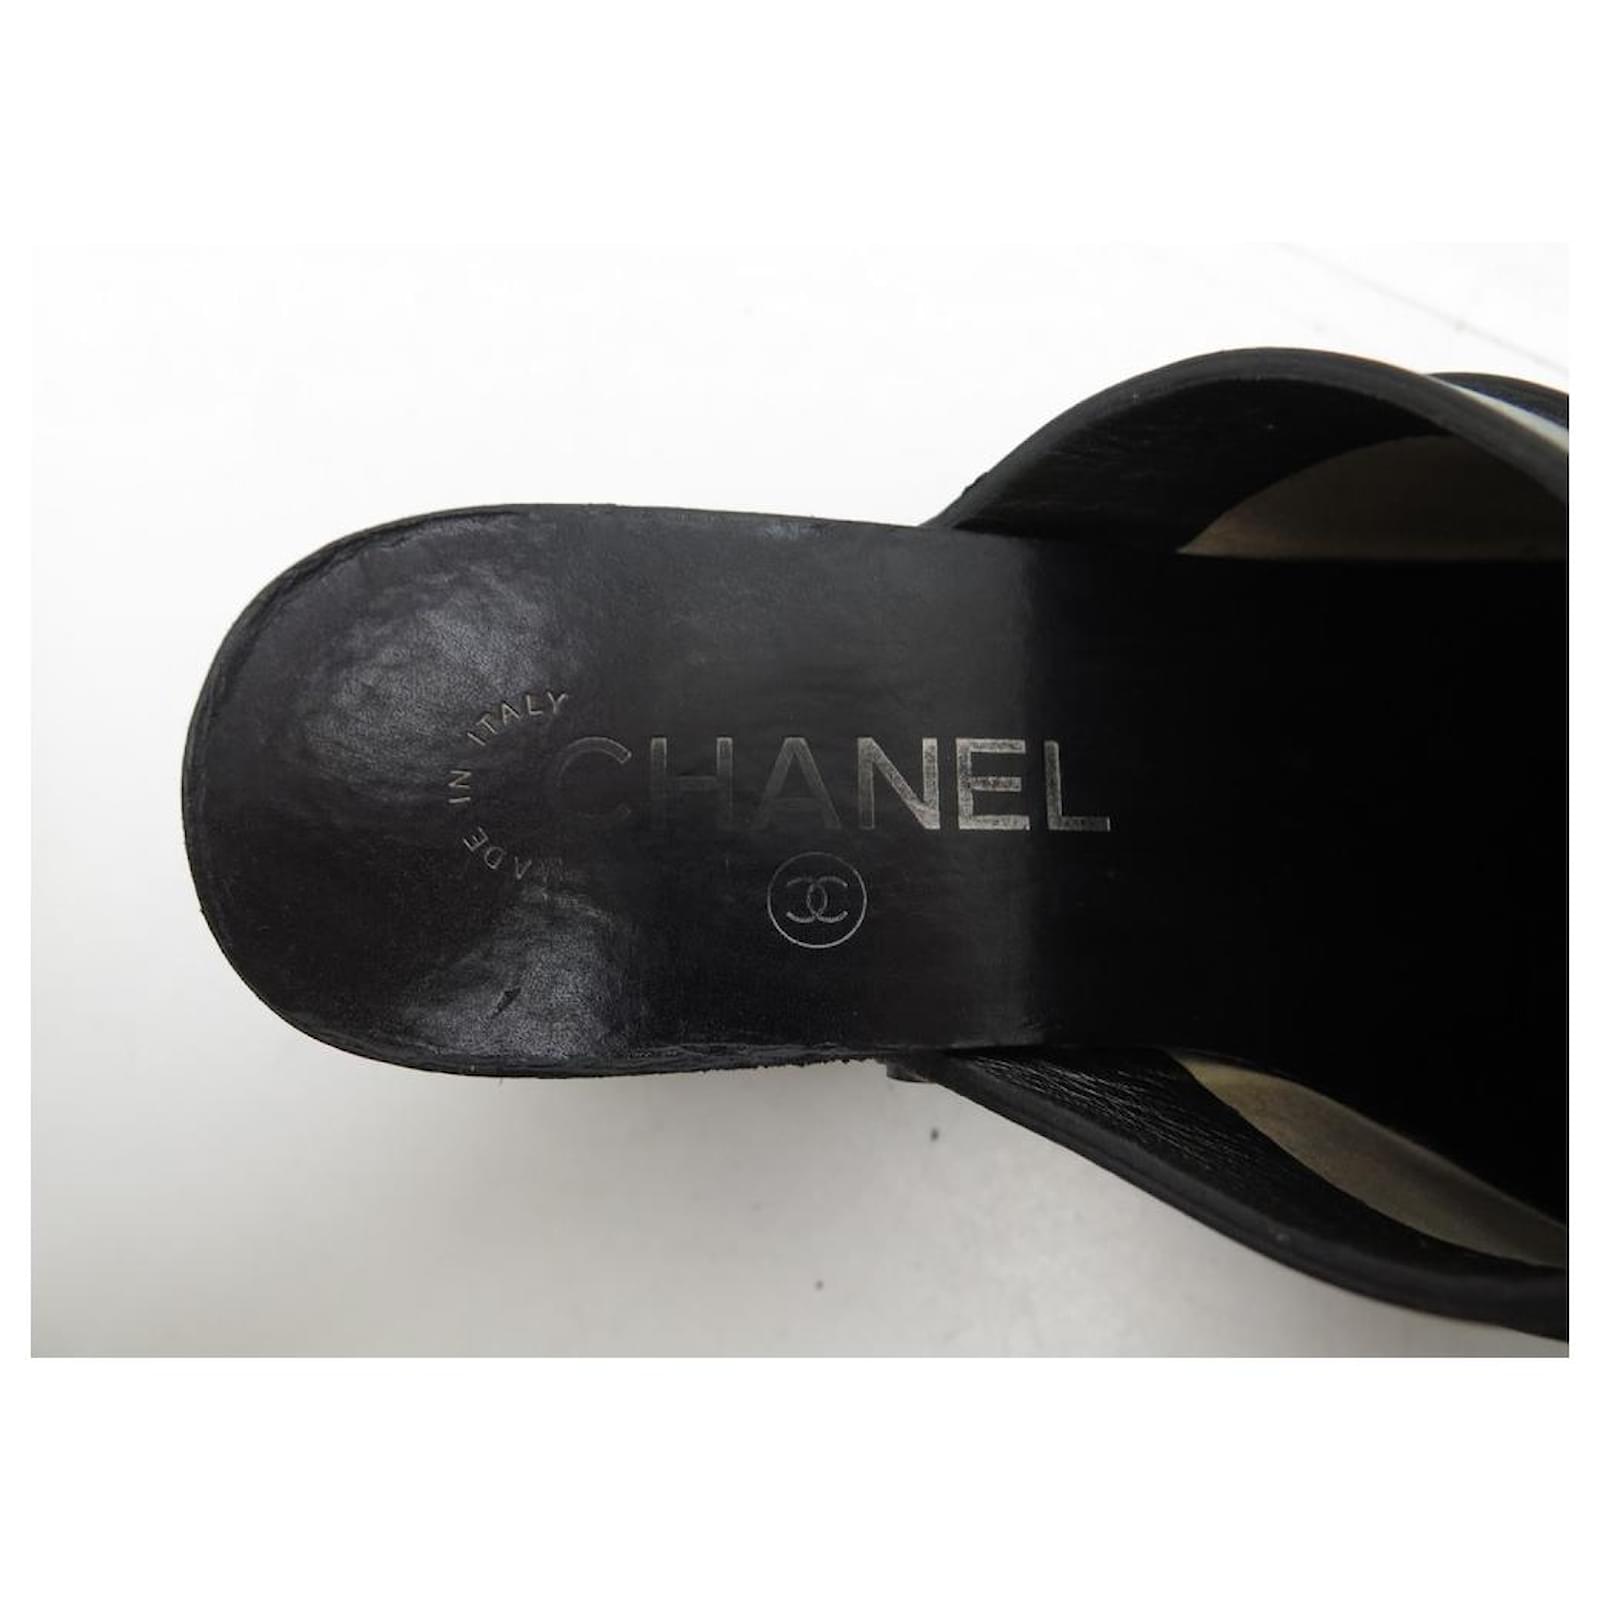 CHANEL SHOES STUDDED CLOGS CHARM LOGO CC LUCKY G30877 37 LEATHER